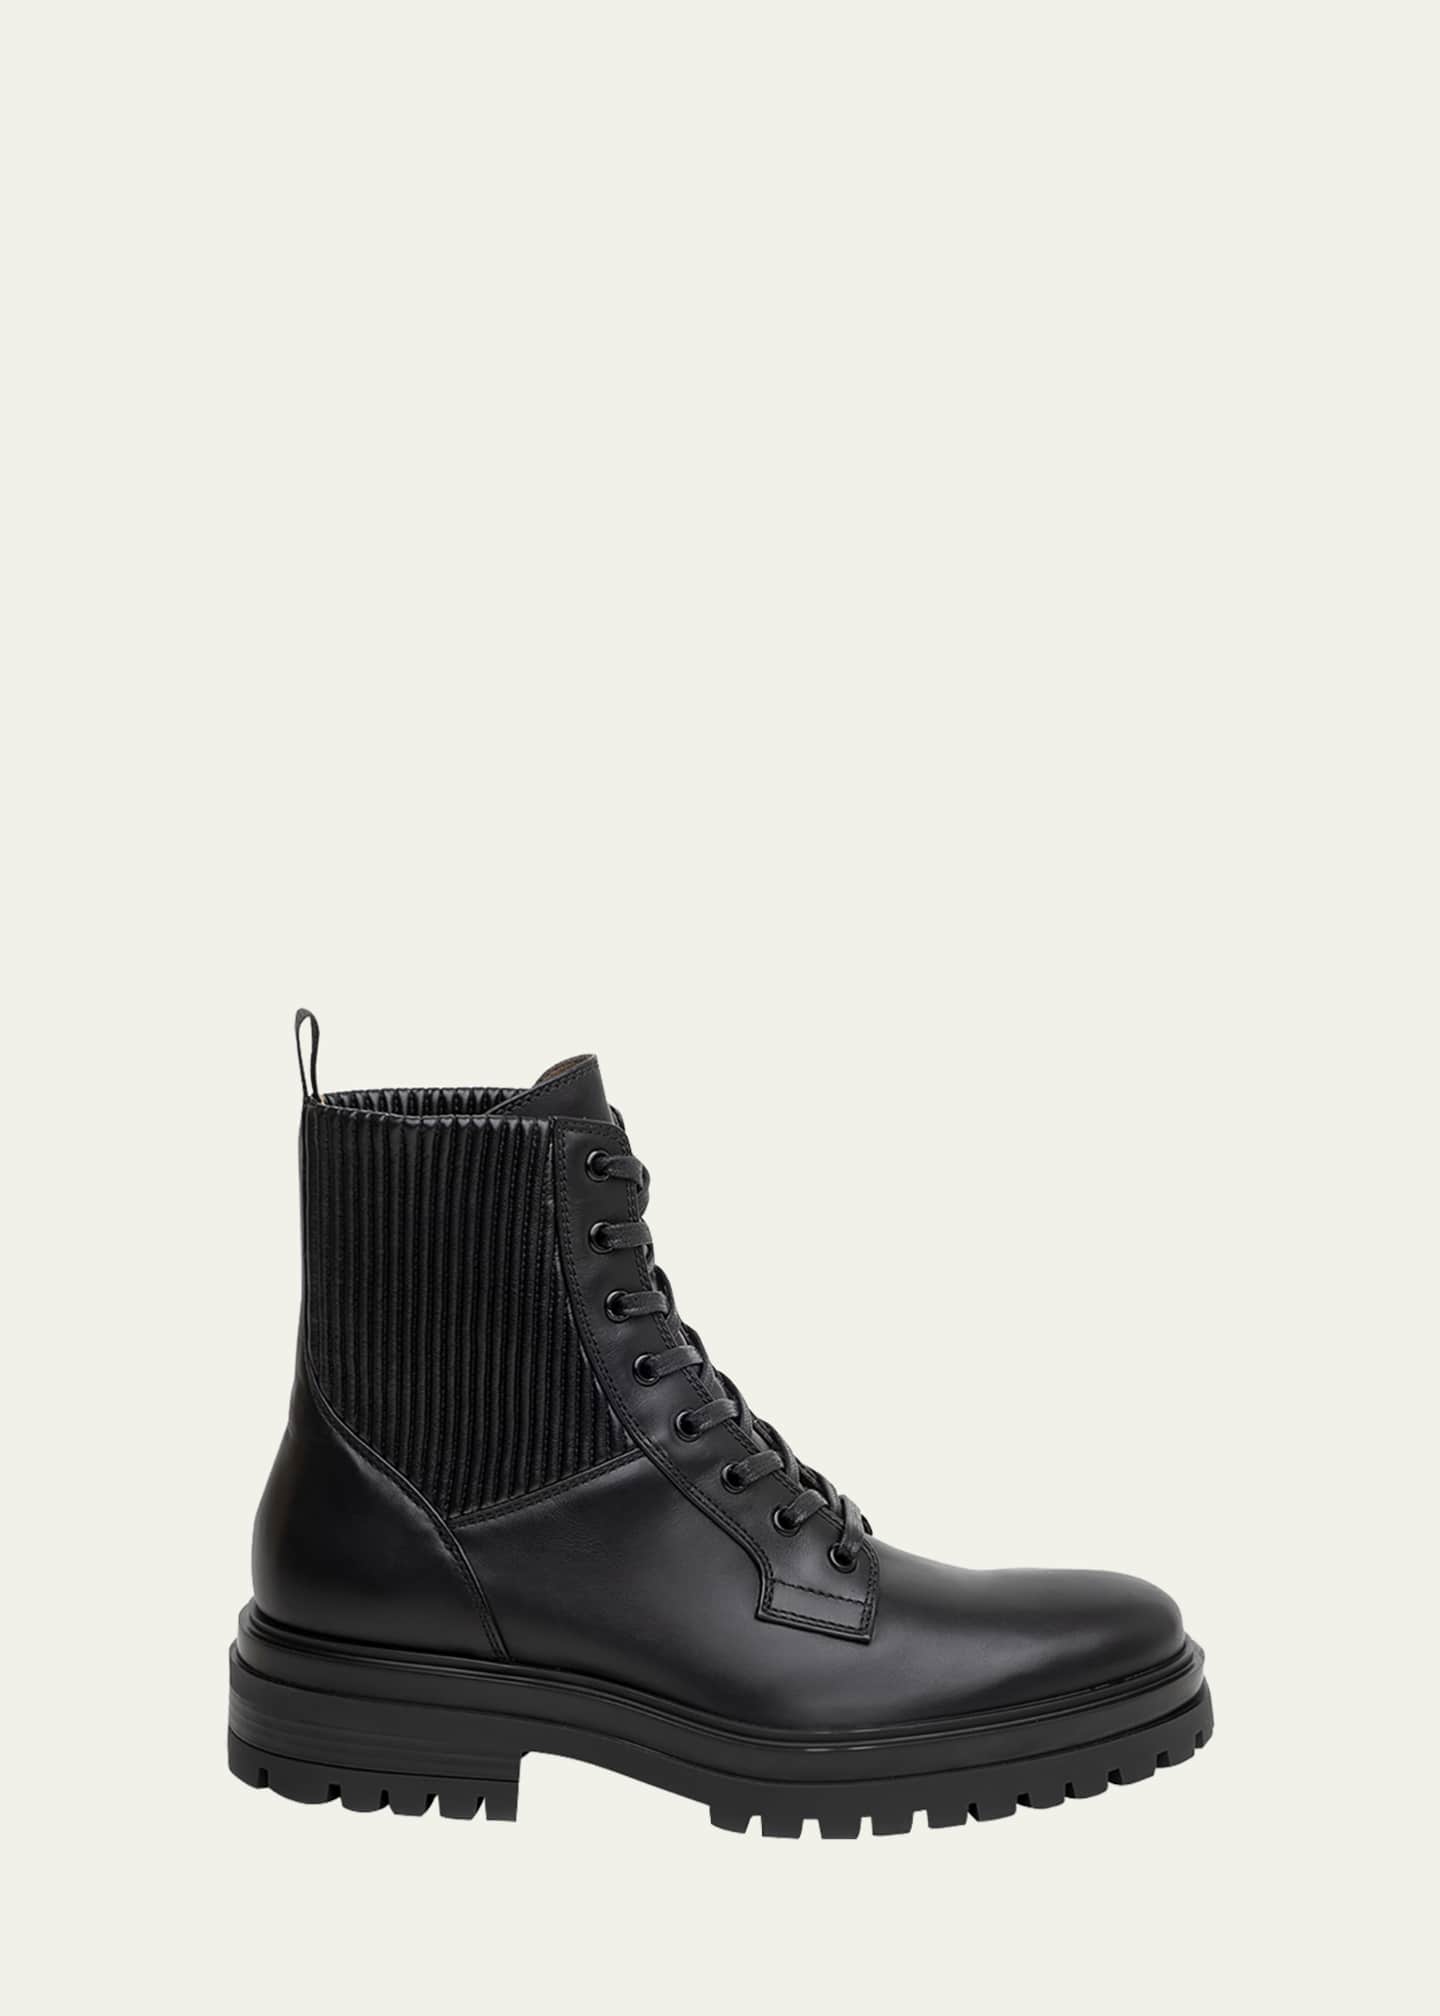 Gianvito Rossi Men's Martis Eco Leather Lace-Up Combat Boots - Bergdorf ...